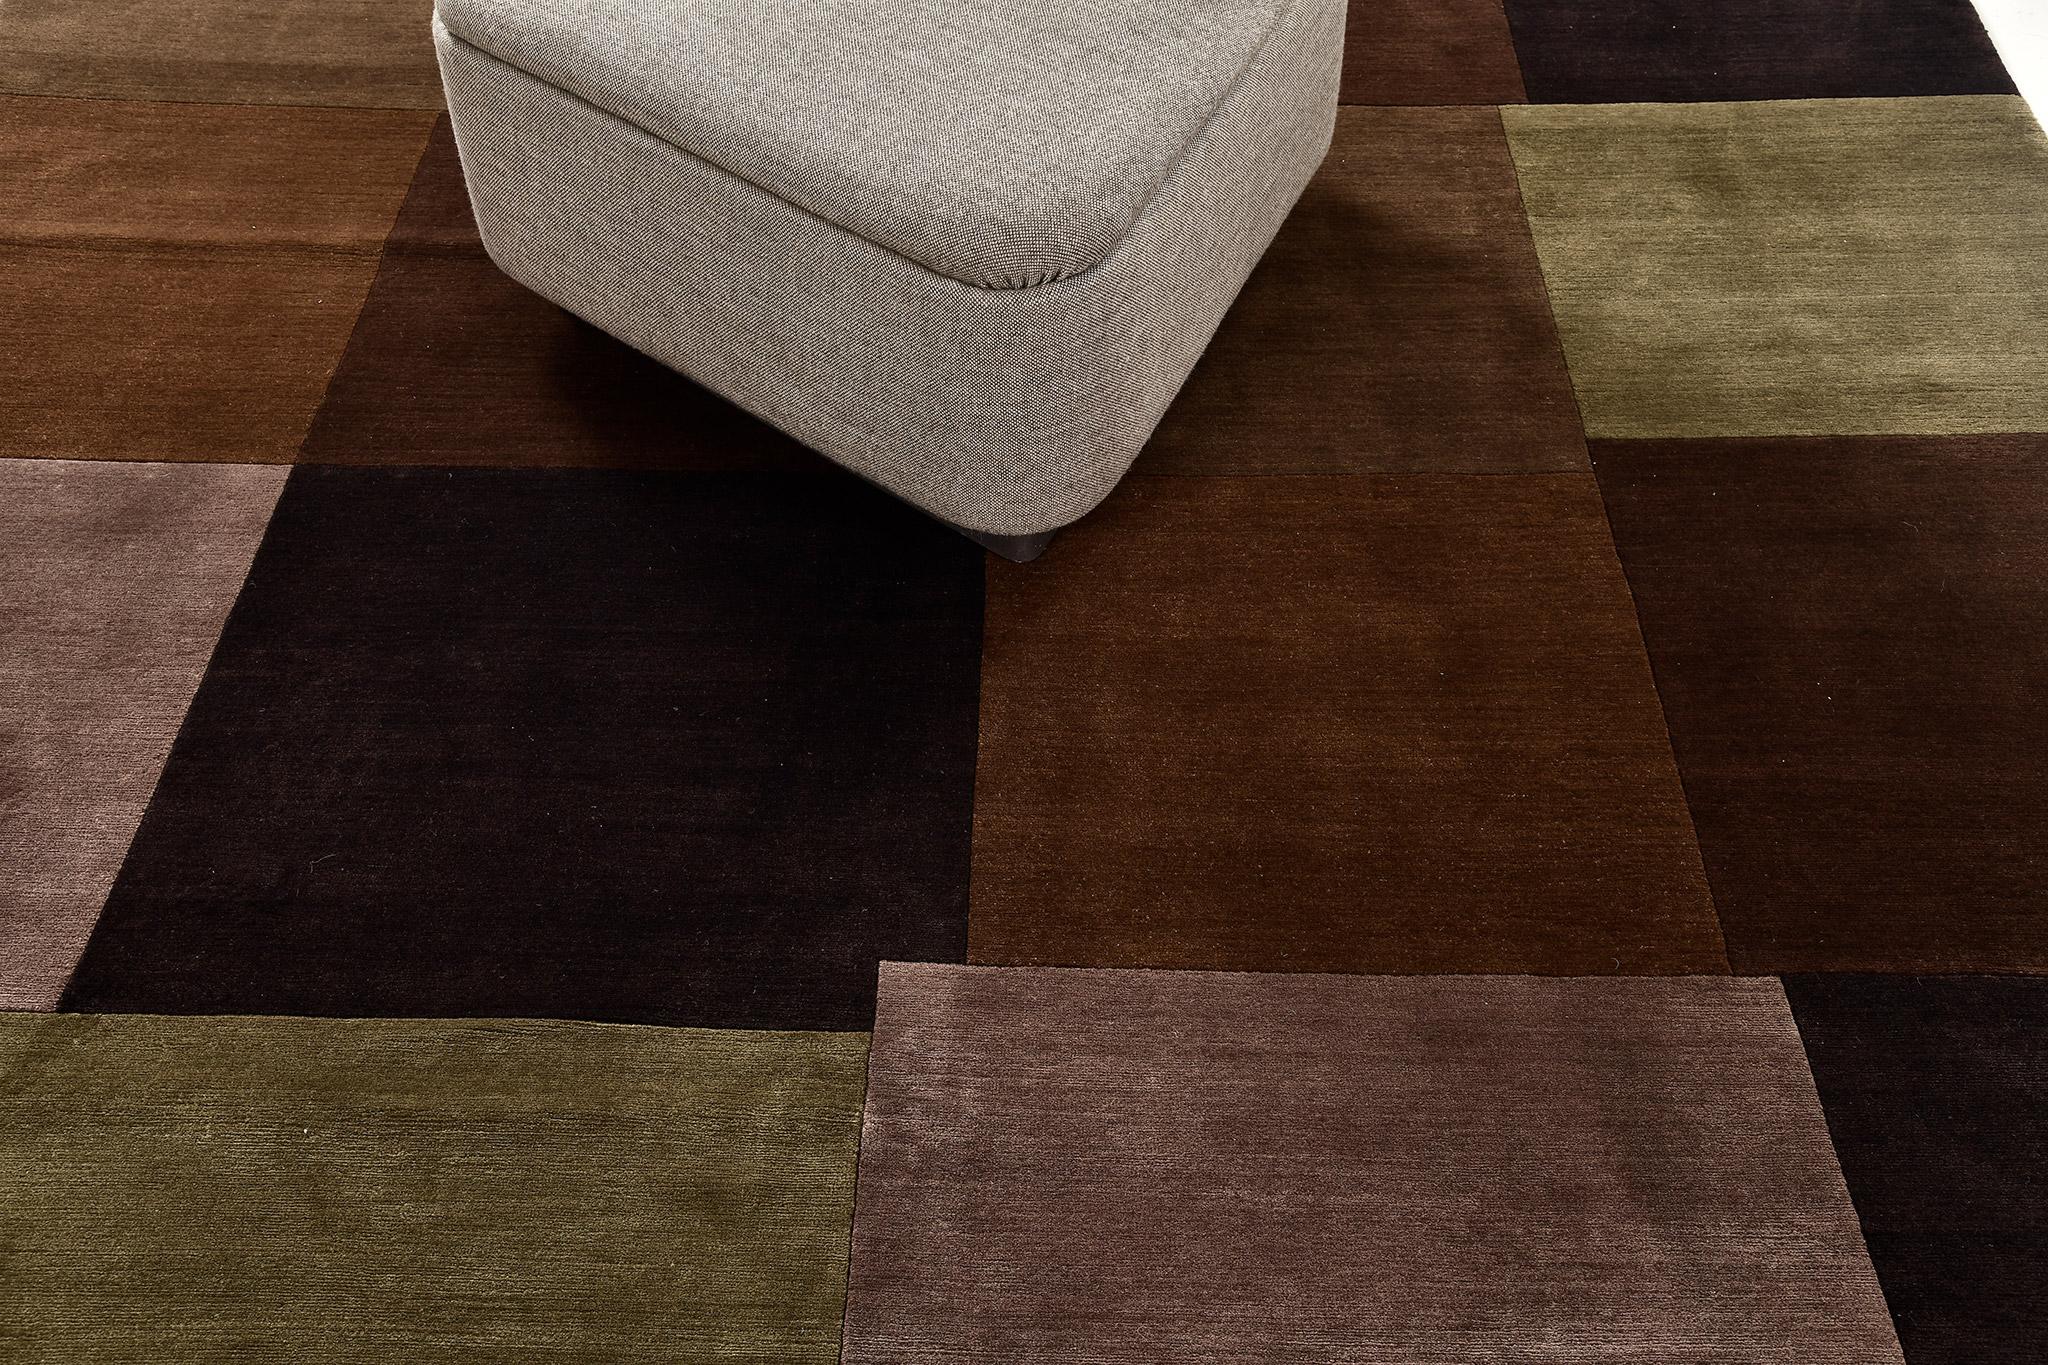 Contemporary and elegant, this Mondrian rug has many dark hues reminiscent of the Baroque period. This rug is a traditional room-sized piece, ideal for flooring or wall applications. A centrepiece that can make your home interior appreciate its